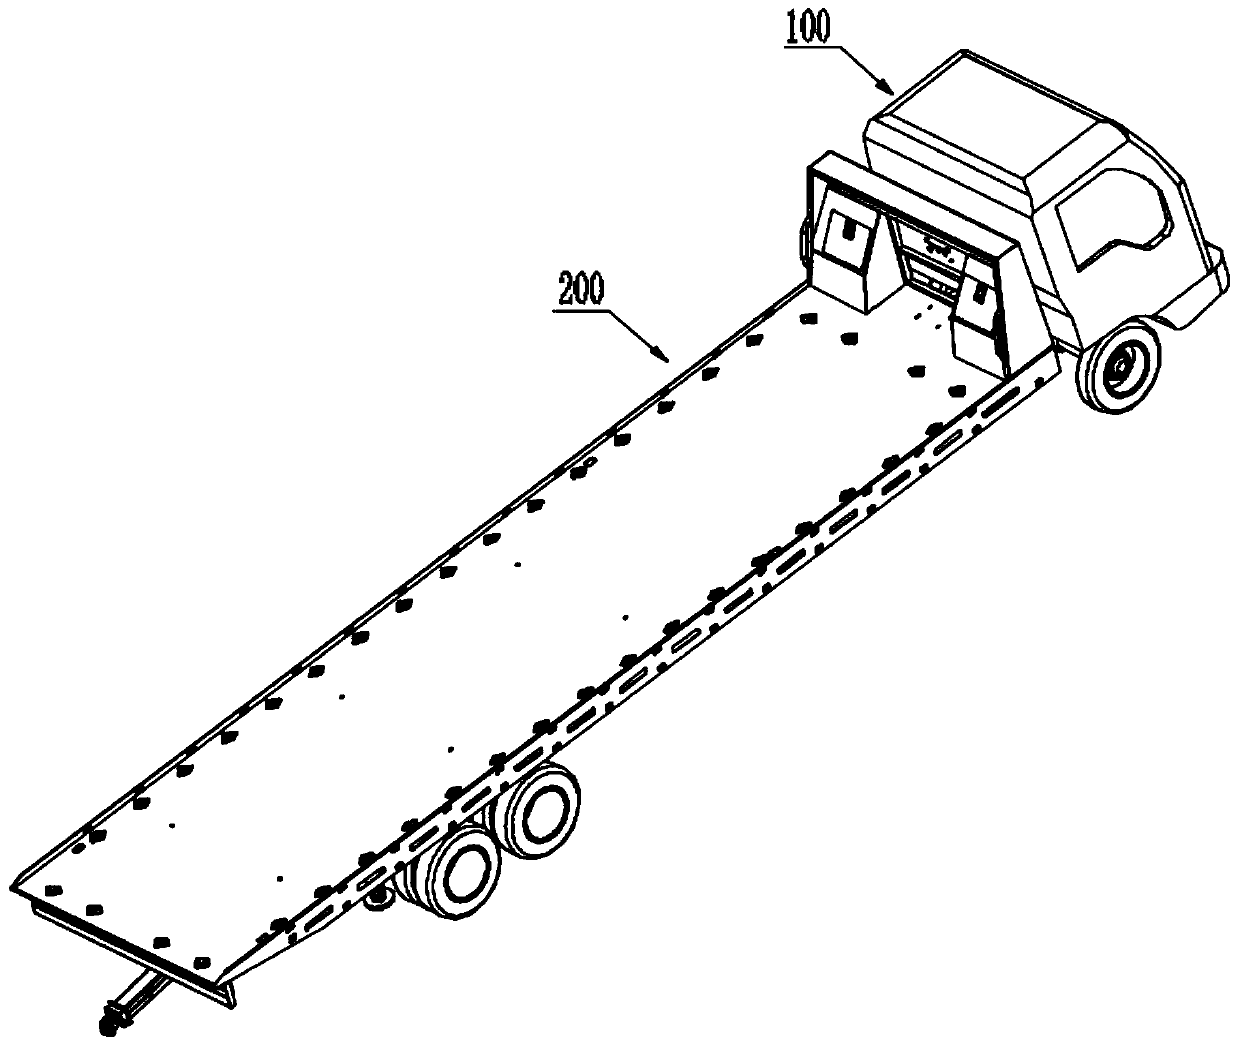 Multifunctional heavy-duty flat-plate wrecker capable of towing three vehicles at a time